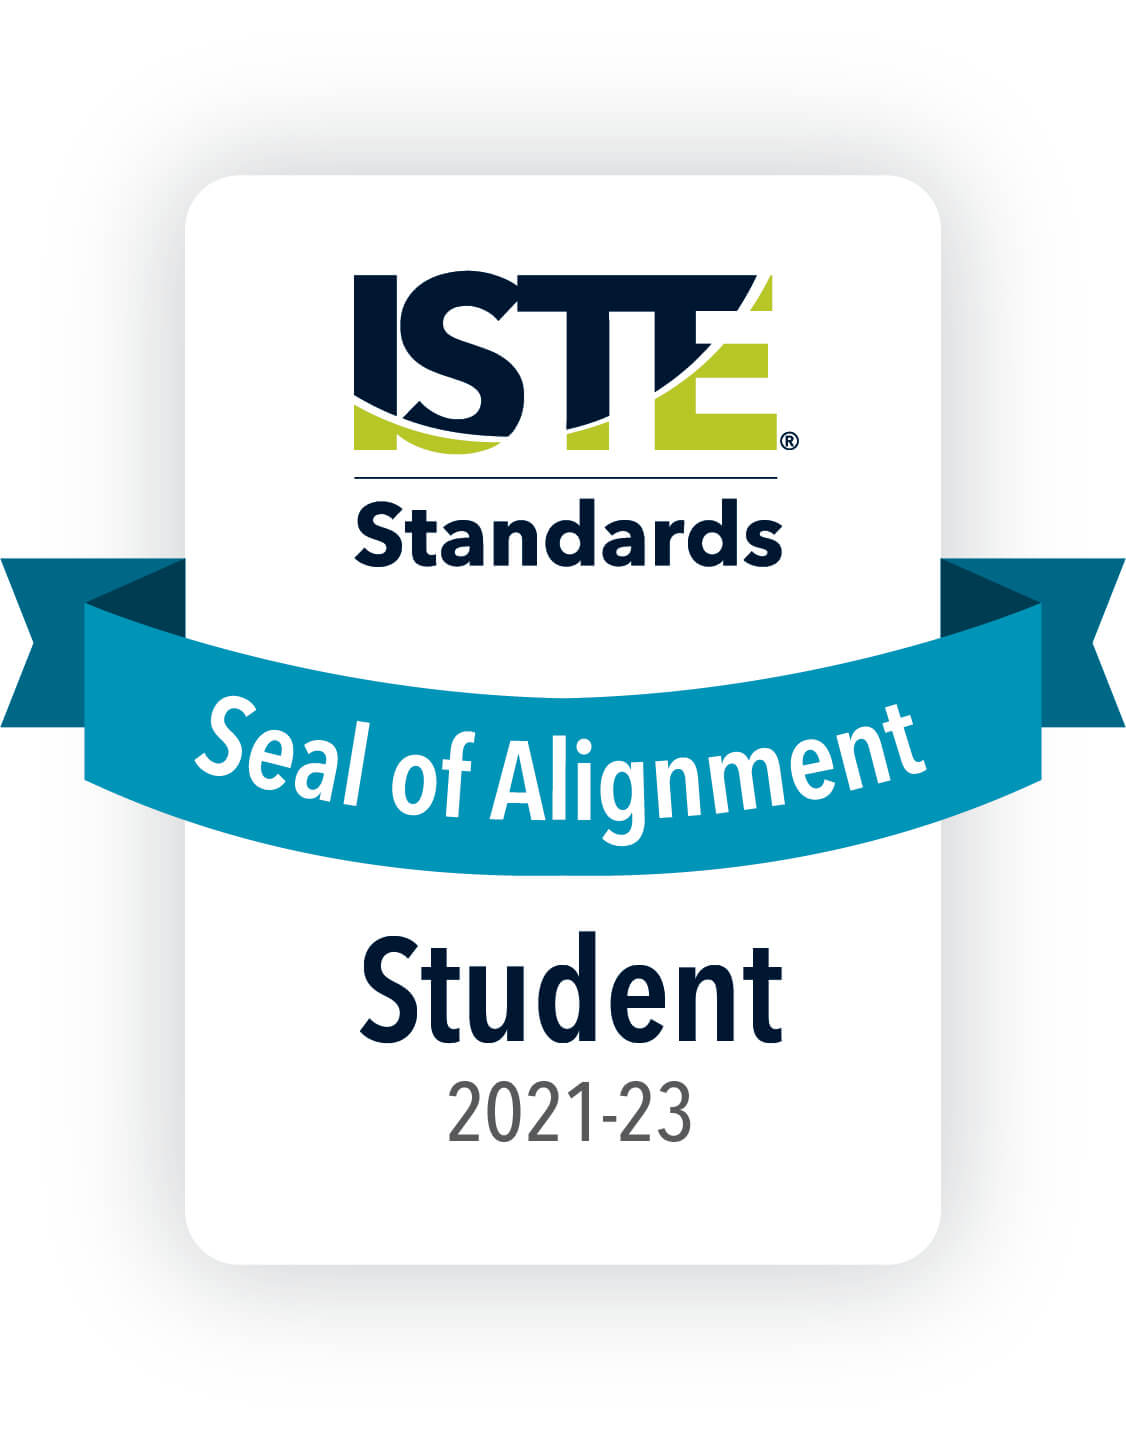 Independently verified by ISTE Student Standards